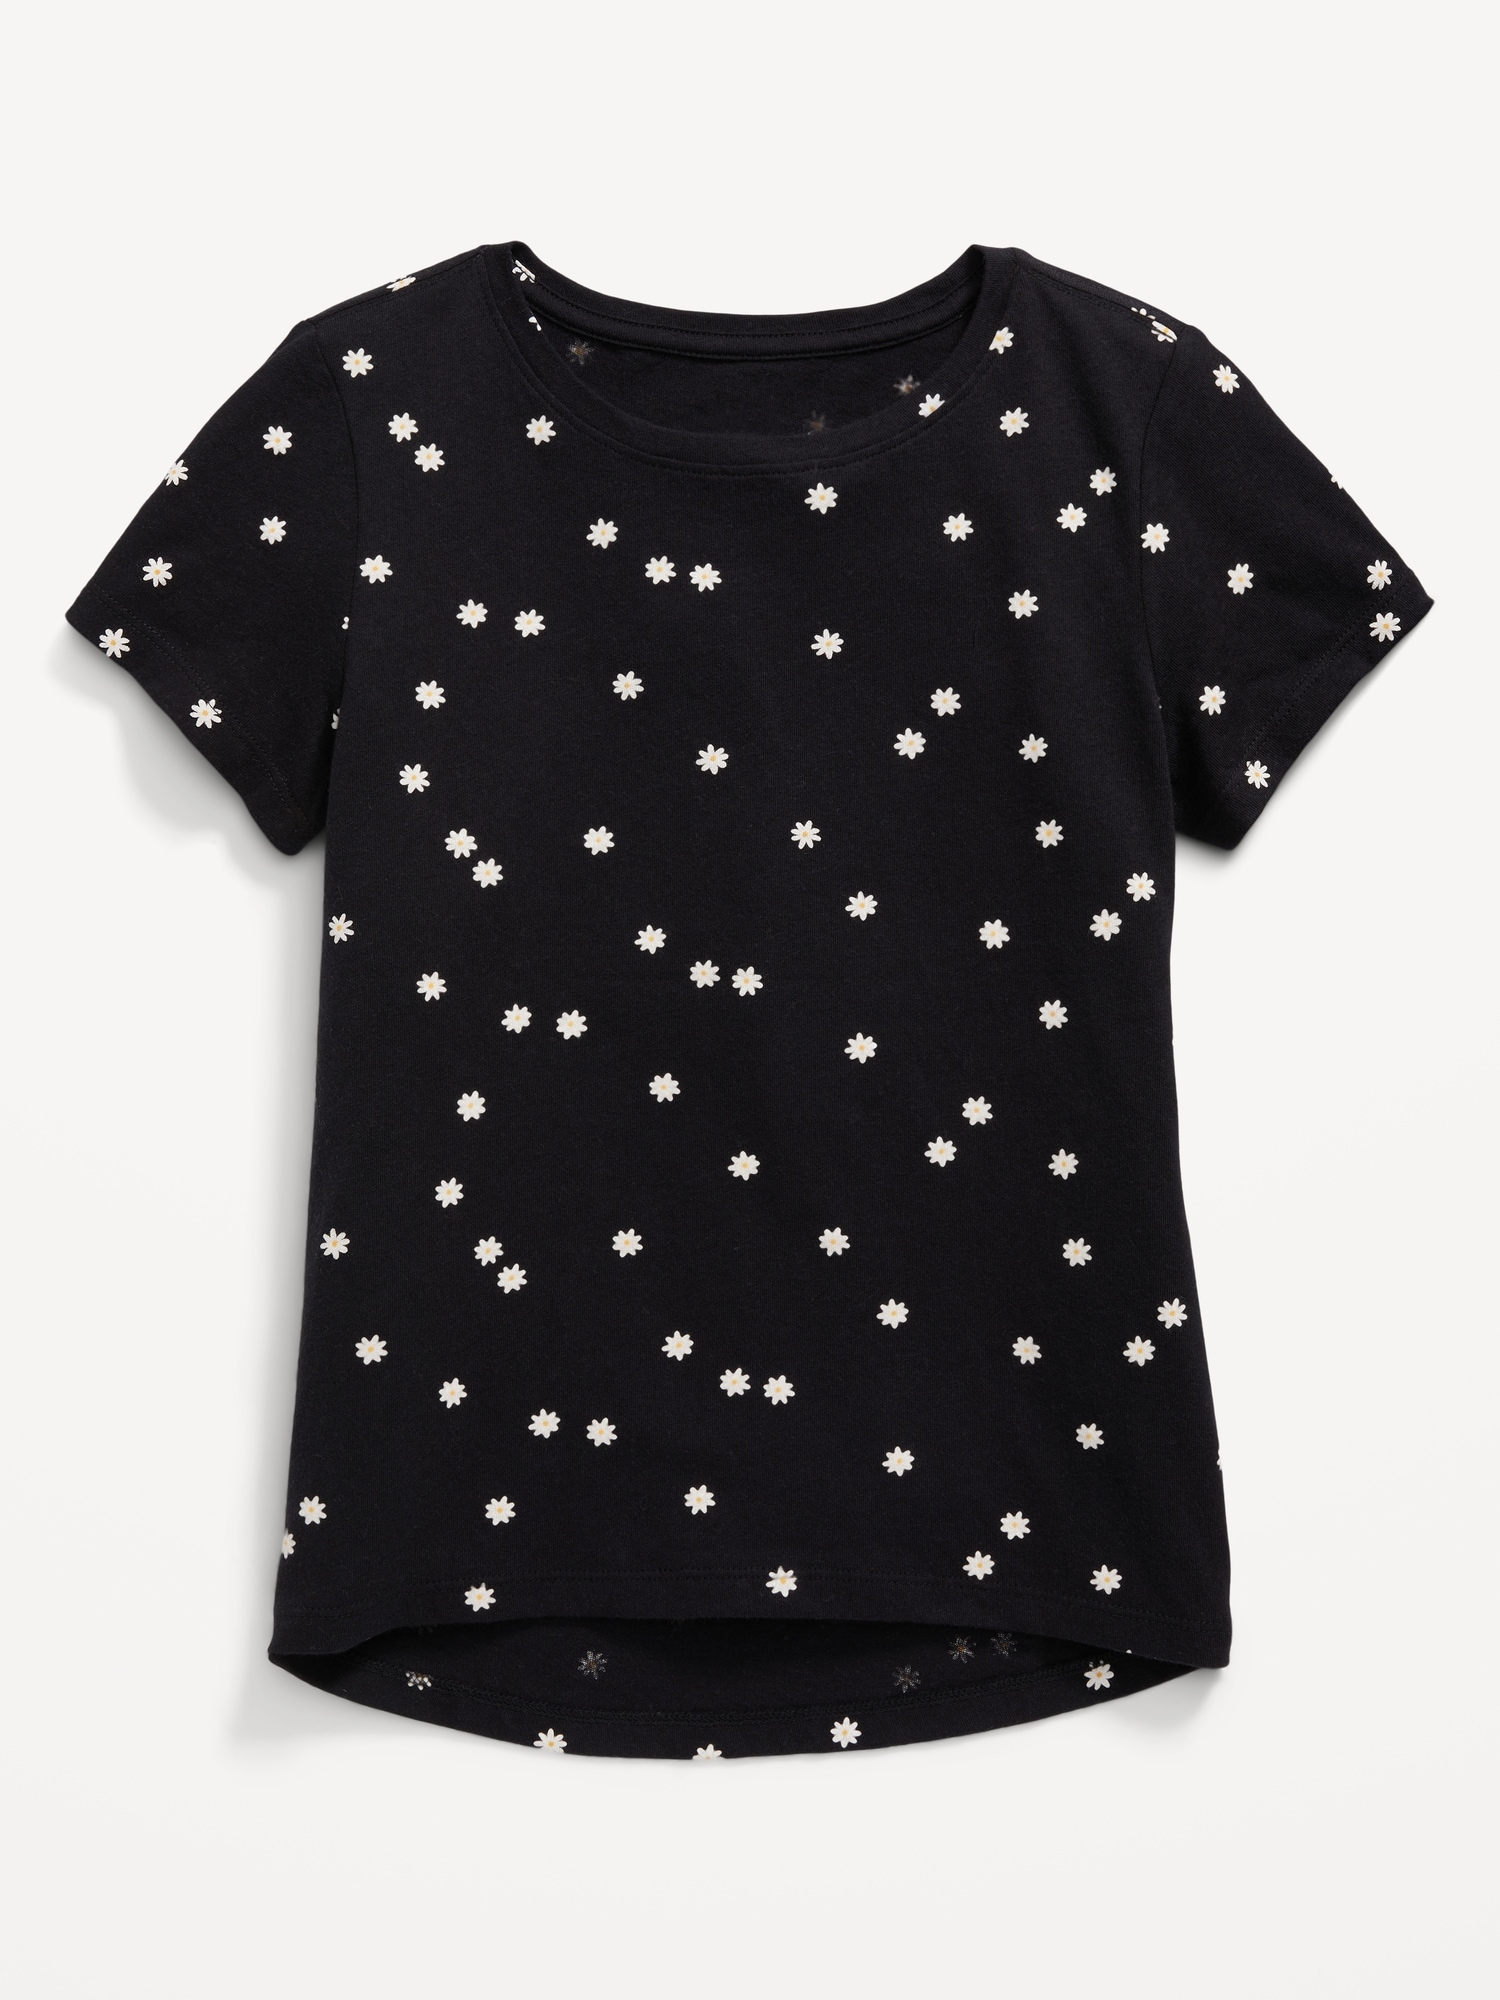 Softest Printed T-Shirt for Girls | Old Navy